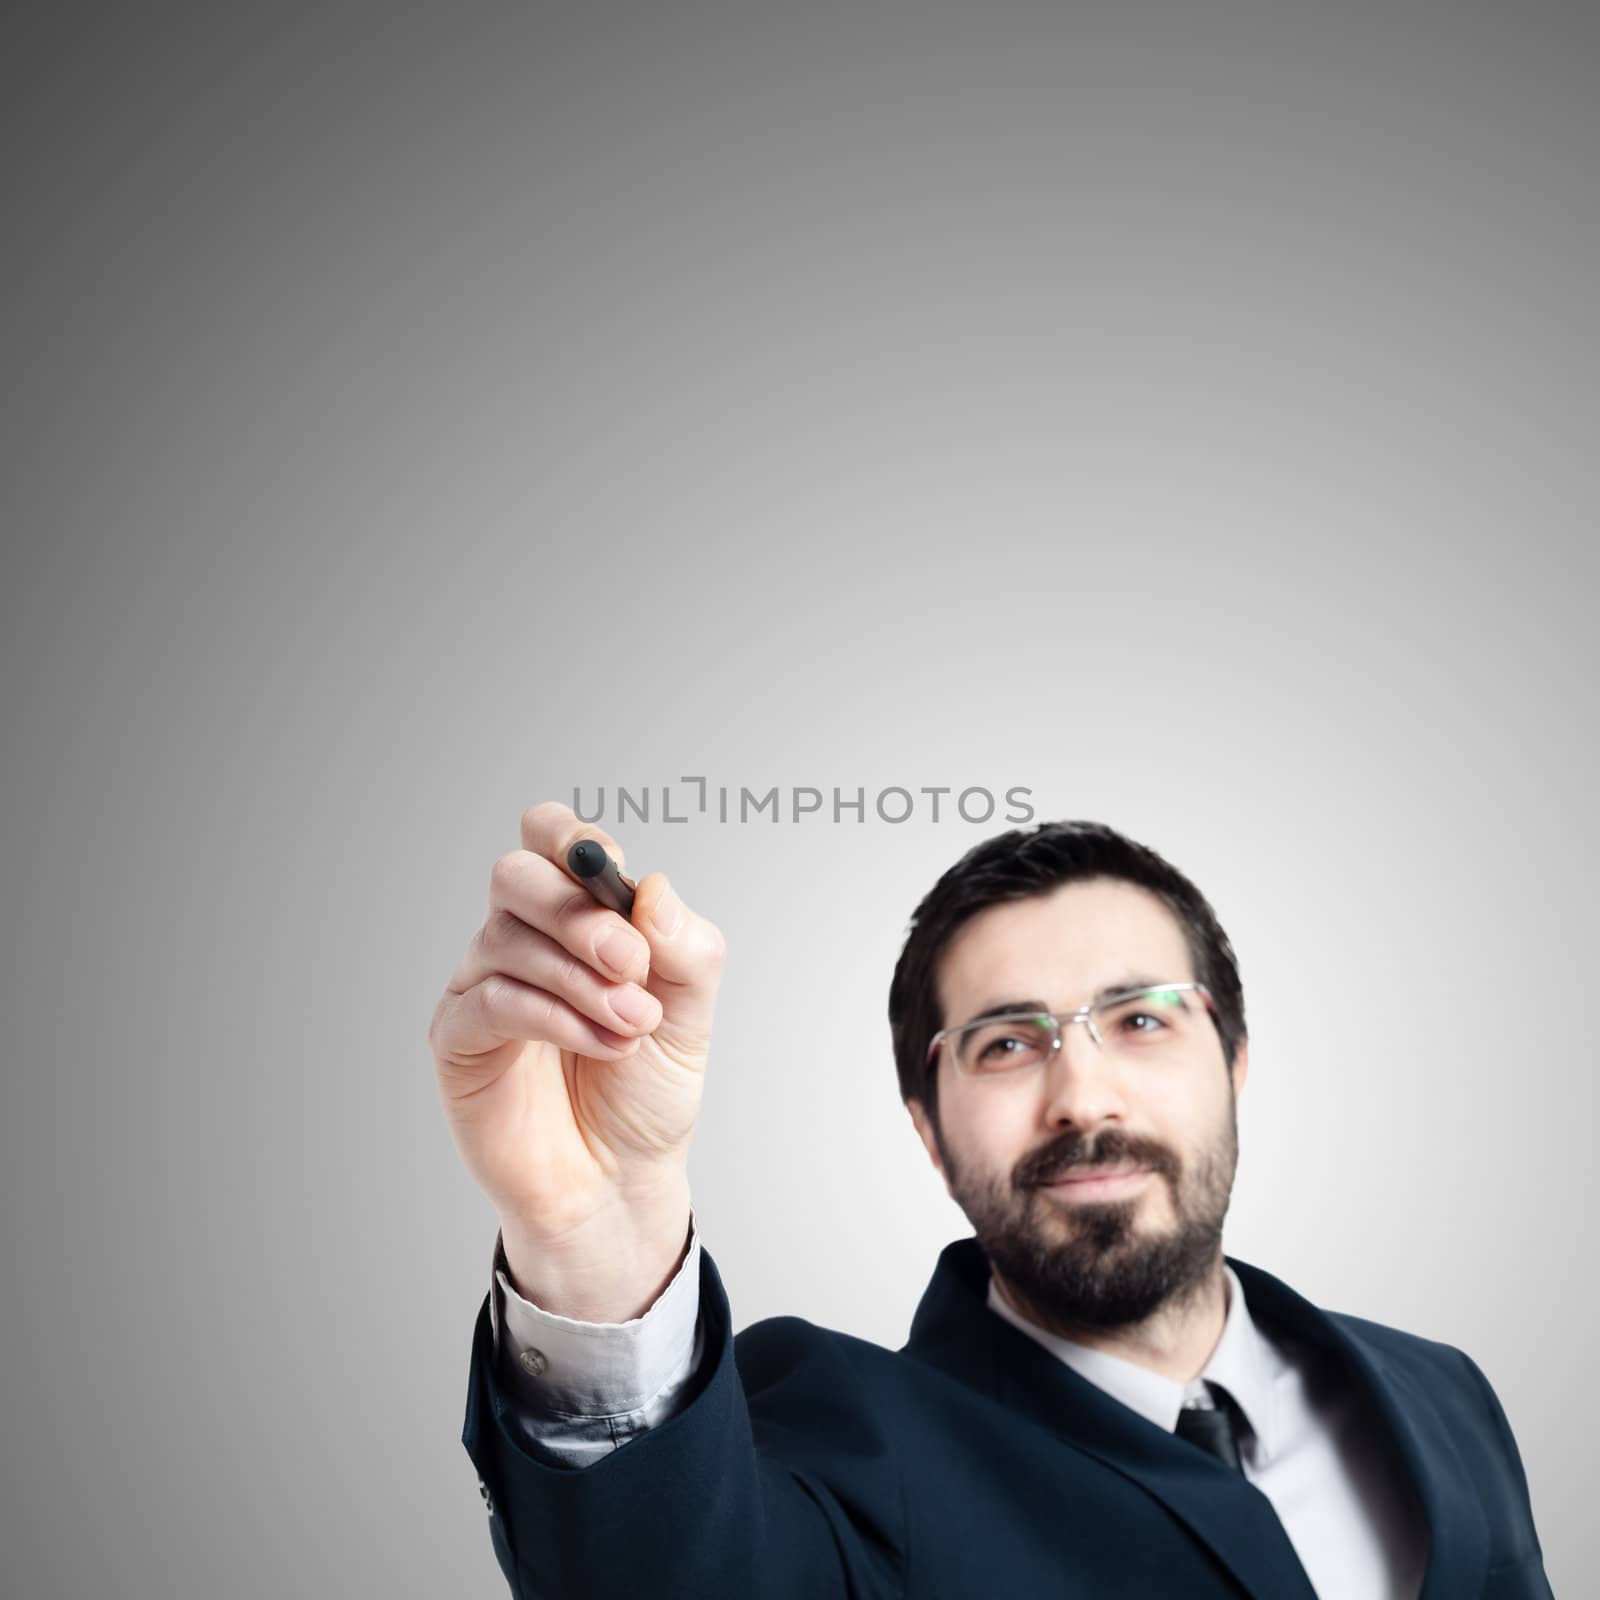 business man writing on imaginary screen on gray background